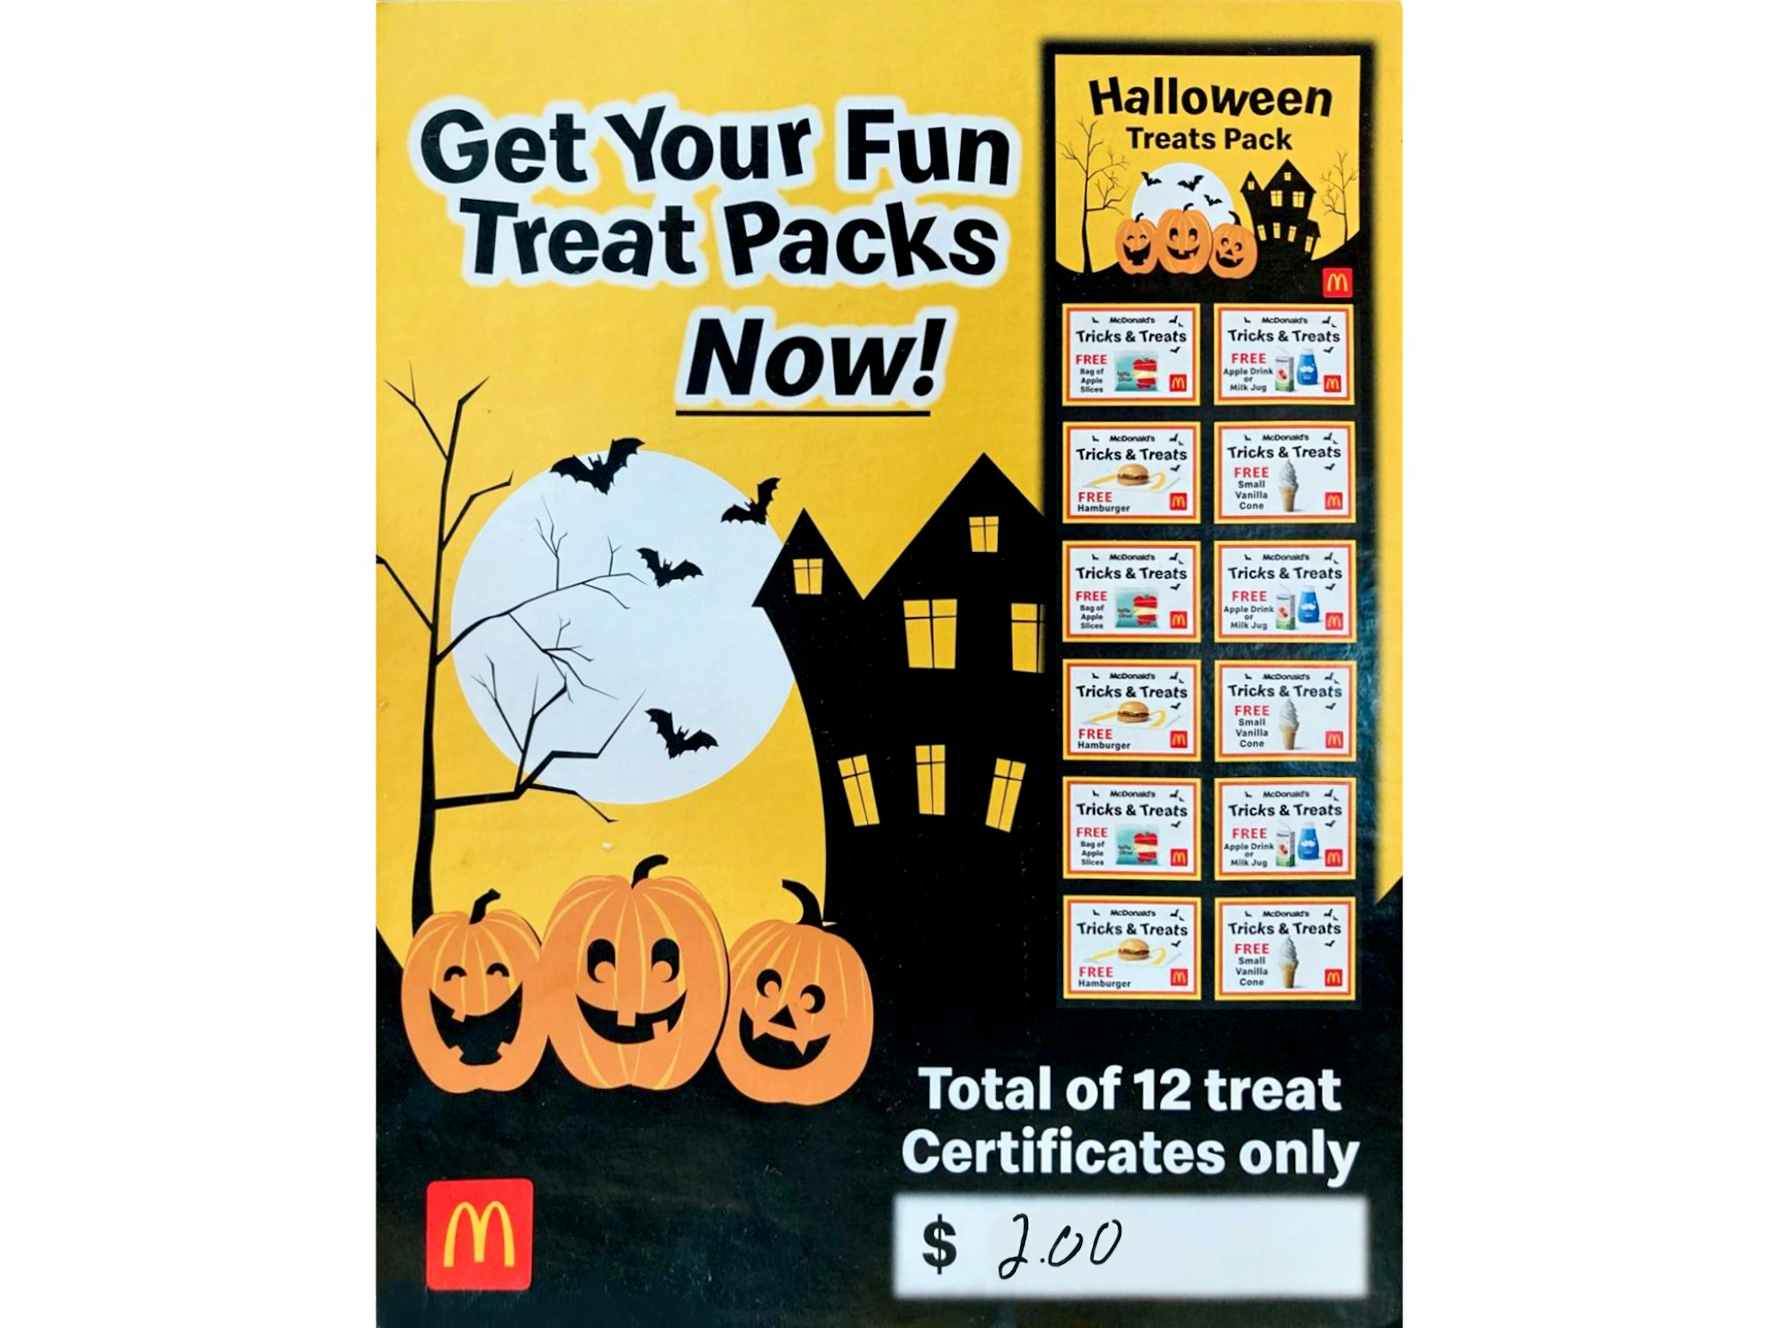 McDonald's Halloween Fun Pack booklets poster